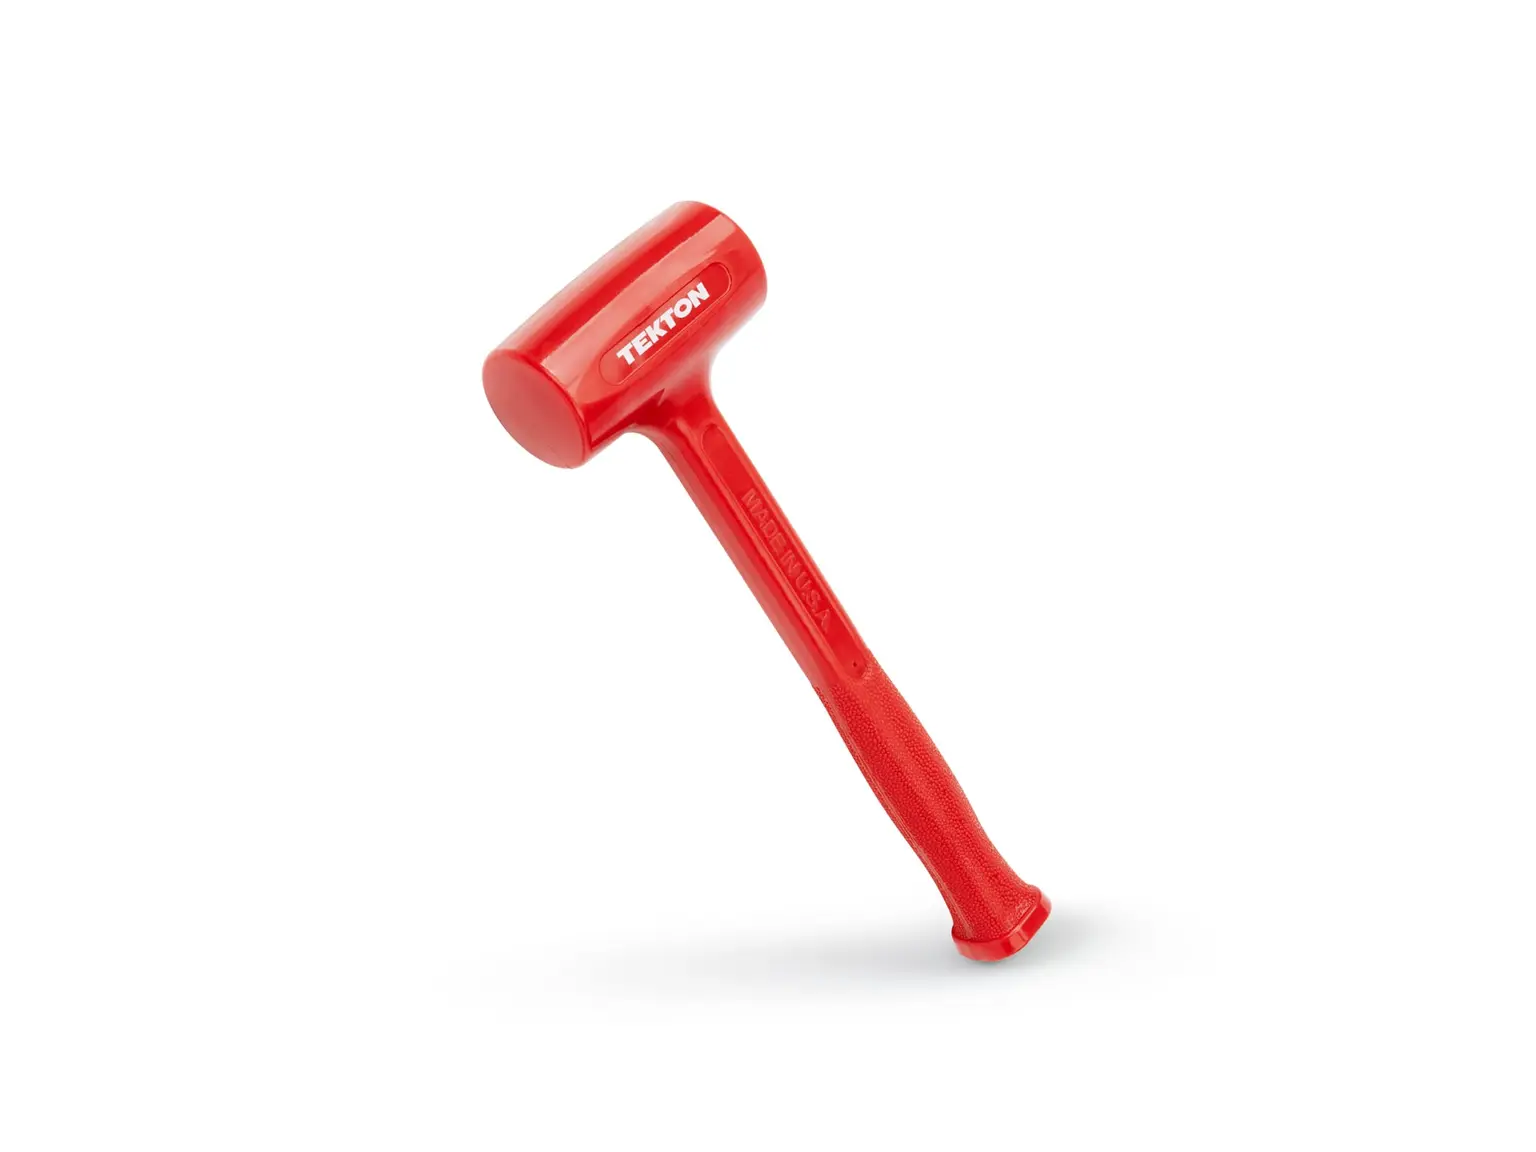 Tekton 26 oz. Dead Blow Hammer from Columbia Safety